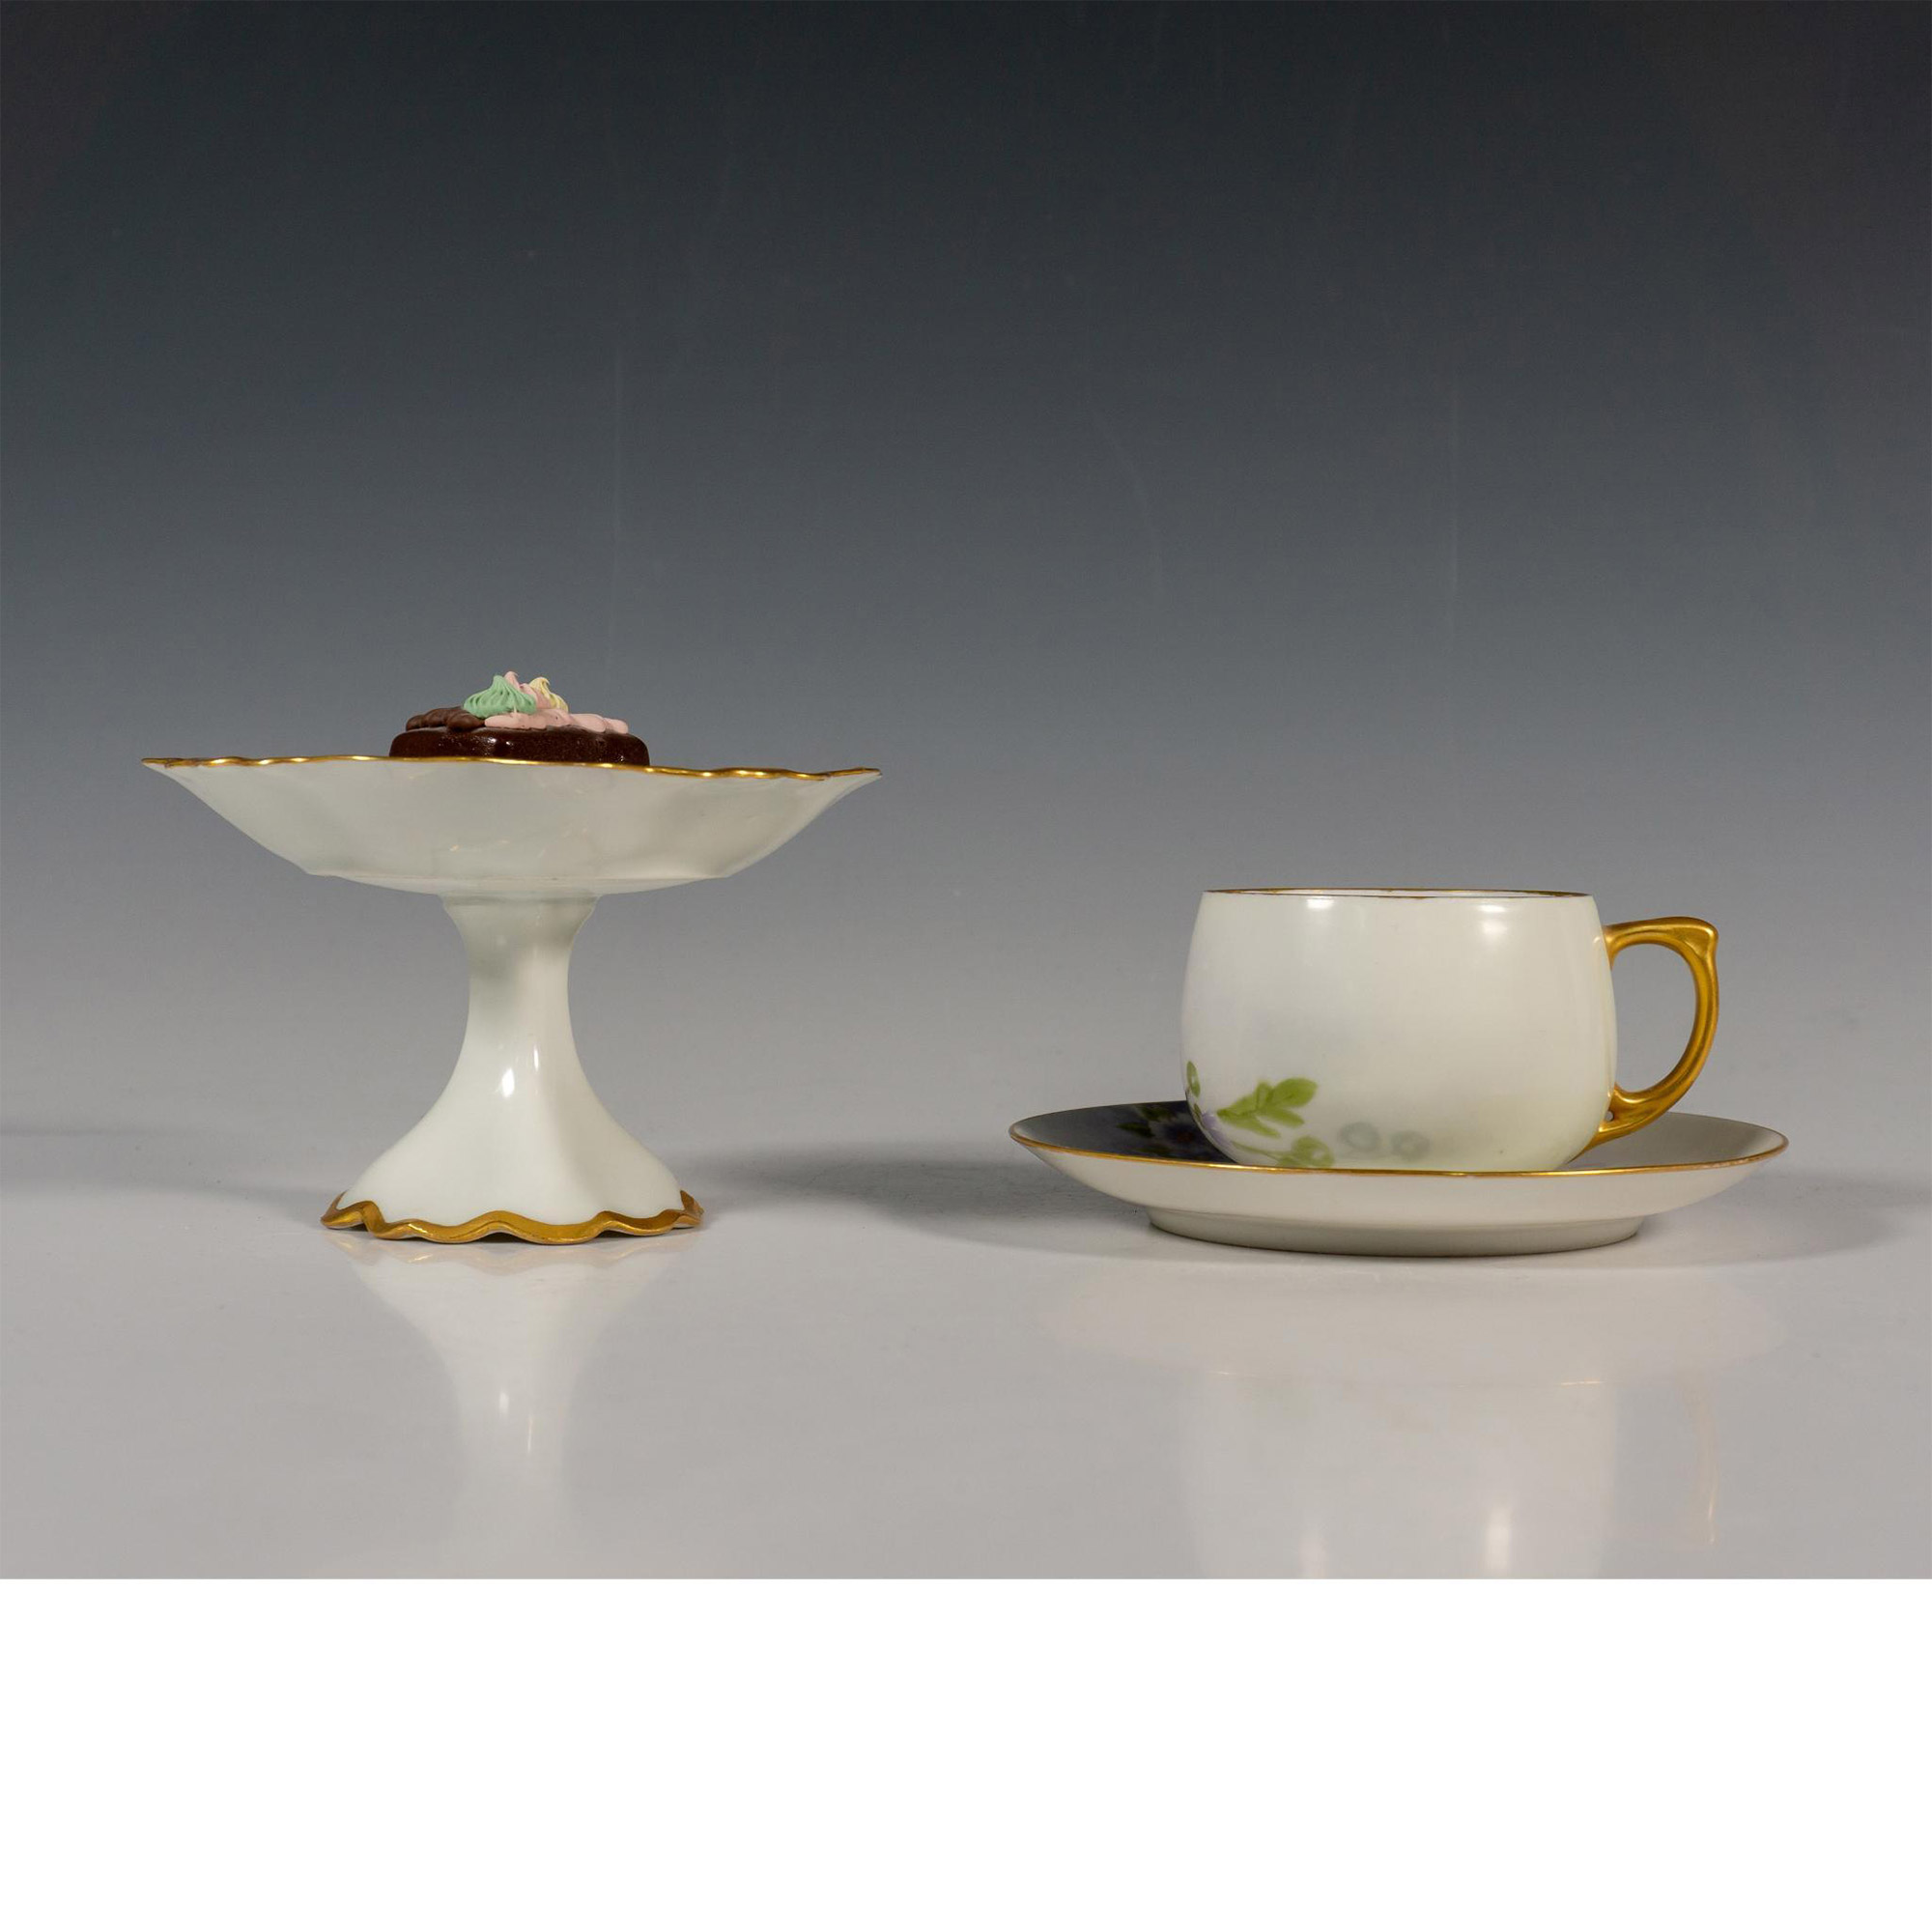 3pc MZ Porcelain Tea Cup, Saucer And Compote - Image 2 of 3